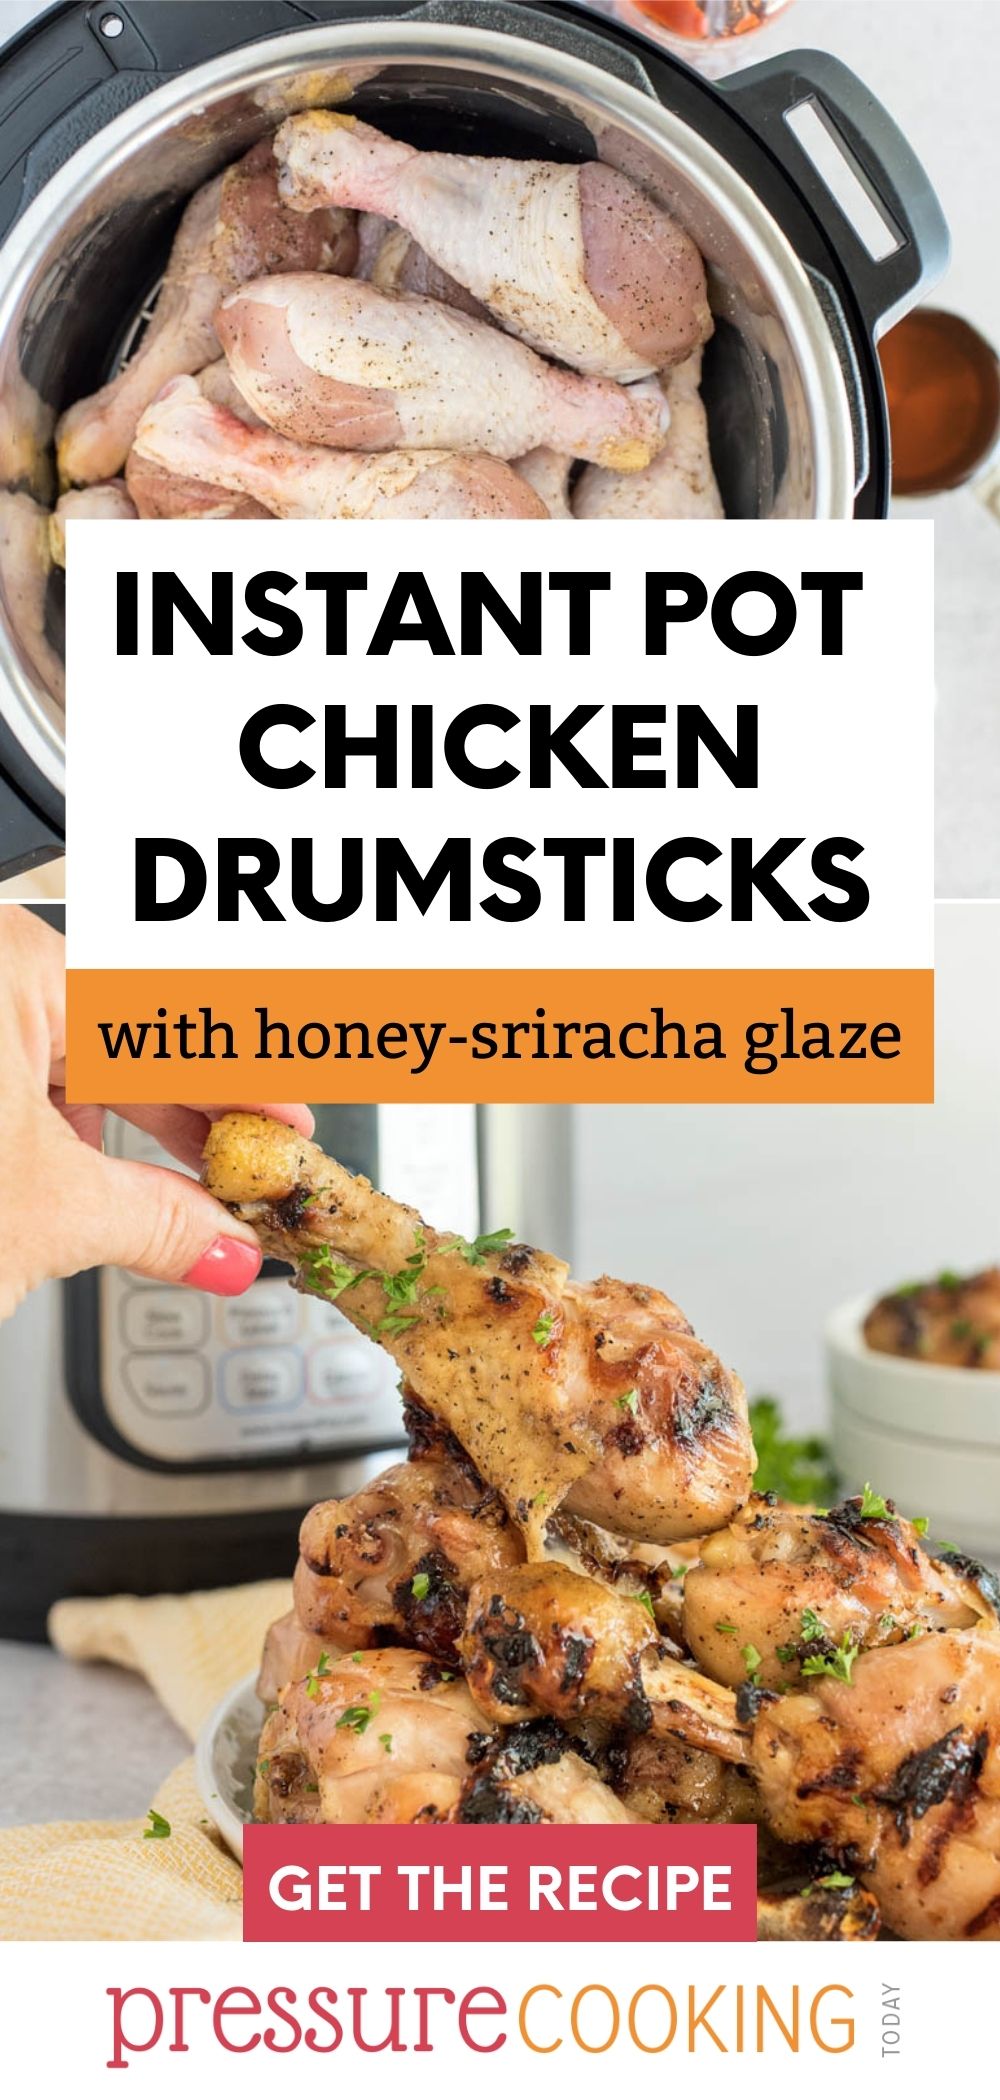 pinterest image promoting "Instant Pot Chicken Drumsticks: with honey-sriracha glaze" text over two images. The top image is uncooked chicken drumsticks in an Instant Pot, and the bottom image is of a hand grabbing a chicken leg that's been cooked and finished on the BBQ, ready to take a bite via @PressureCook2da